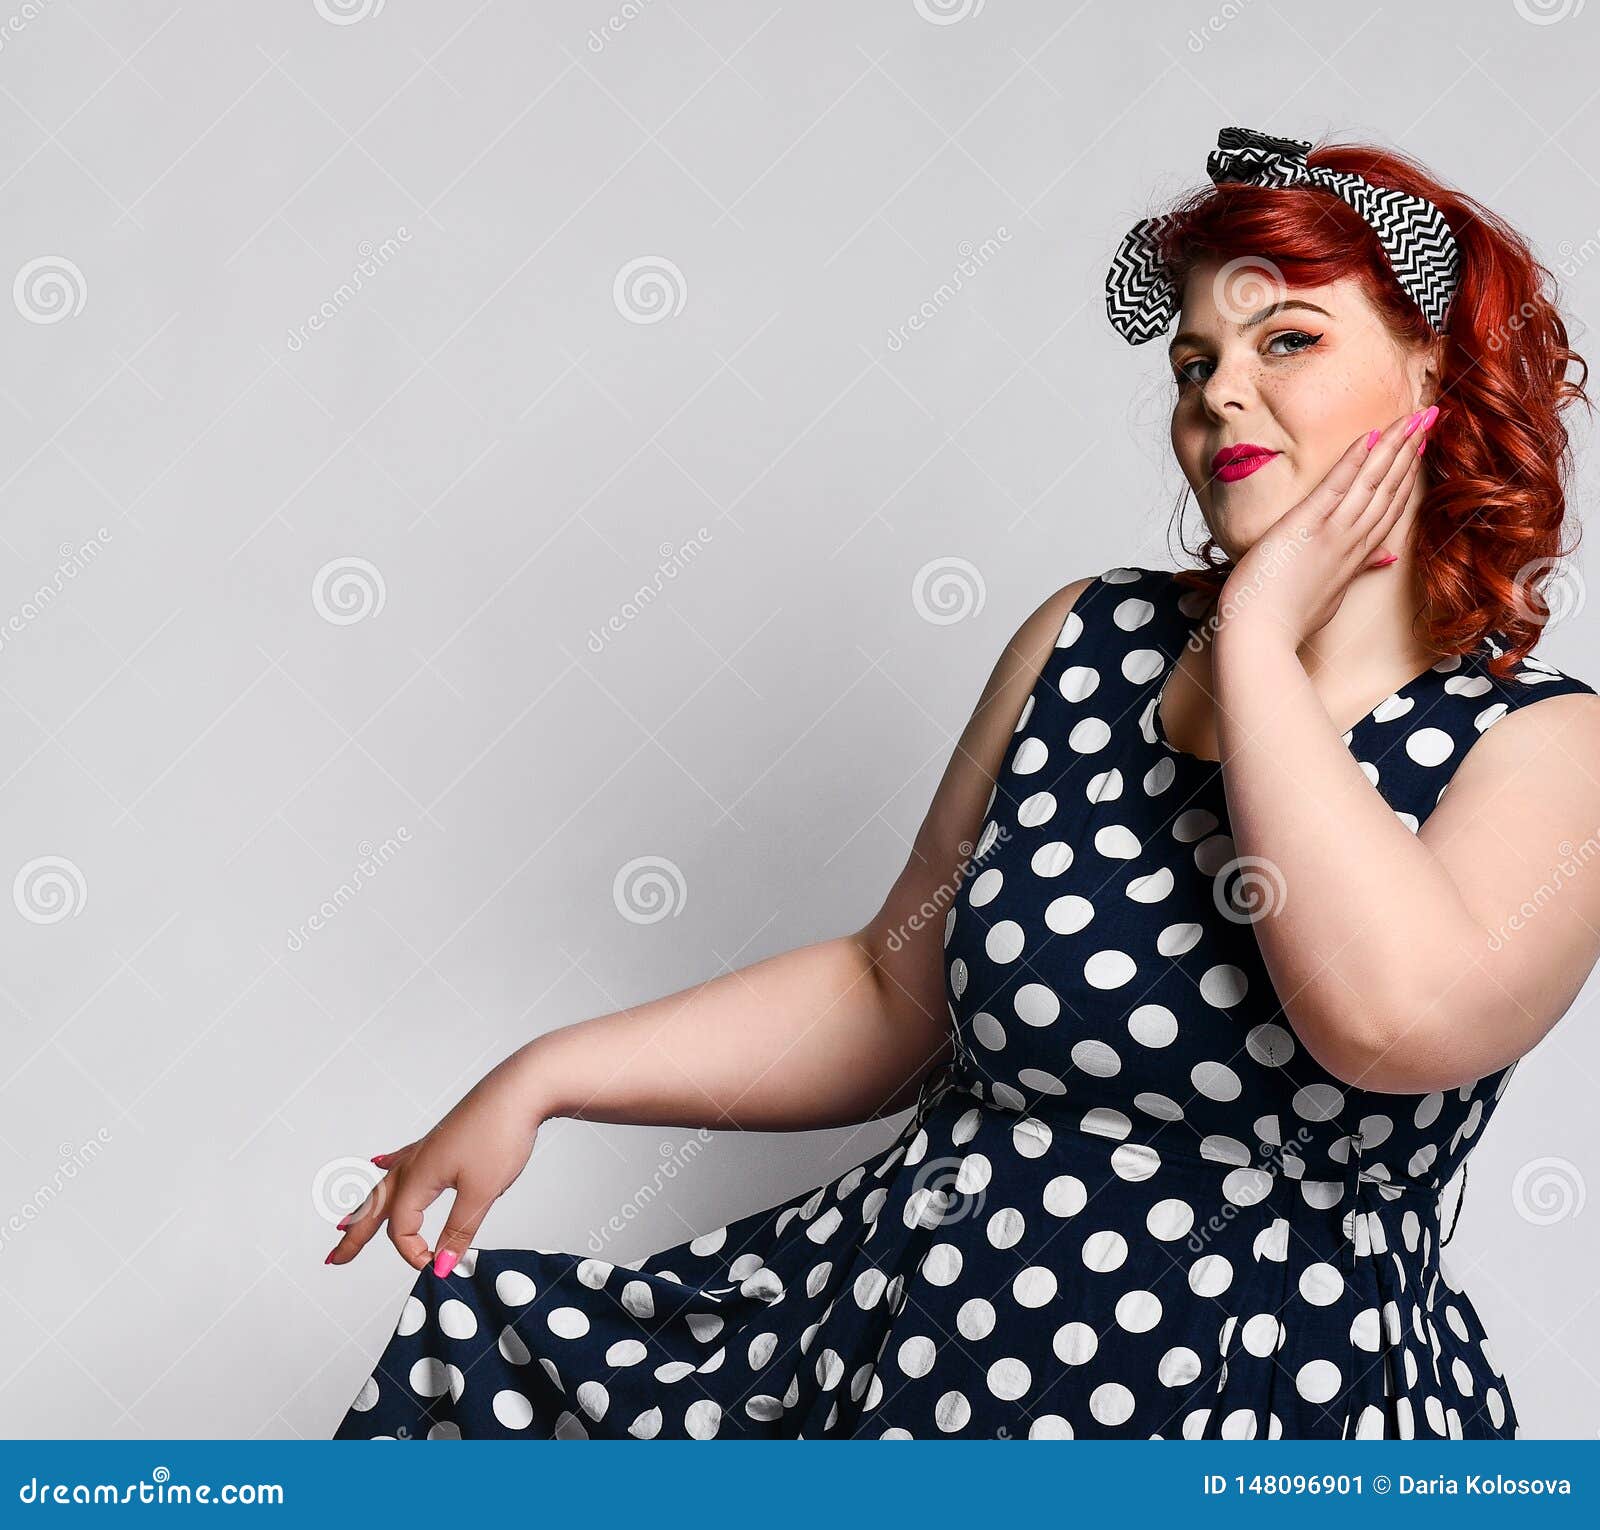 https://thumbs.dreamstime.com/z/portrait-cute-beautiful-retro-full-fat-woman-polka-dot-dress-red-lips-manicure-nails-old-style-haircut-pin-up-148096901.jpg